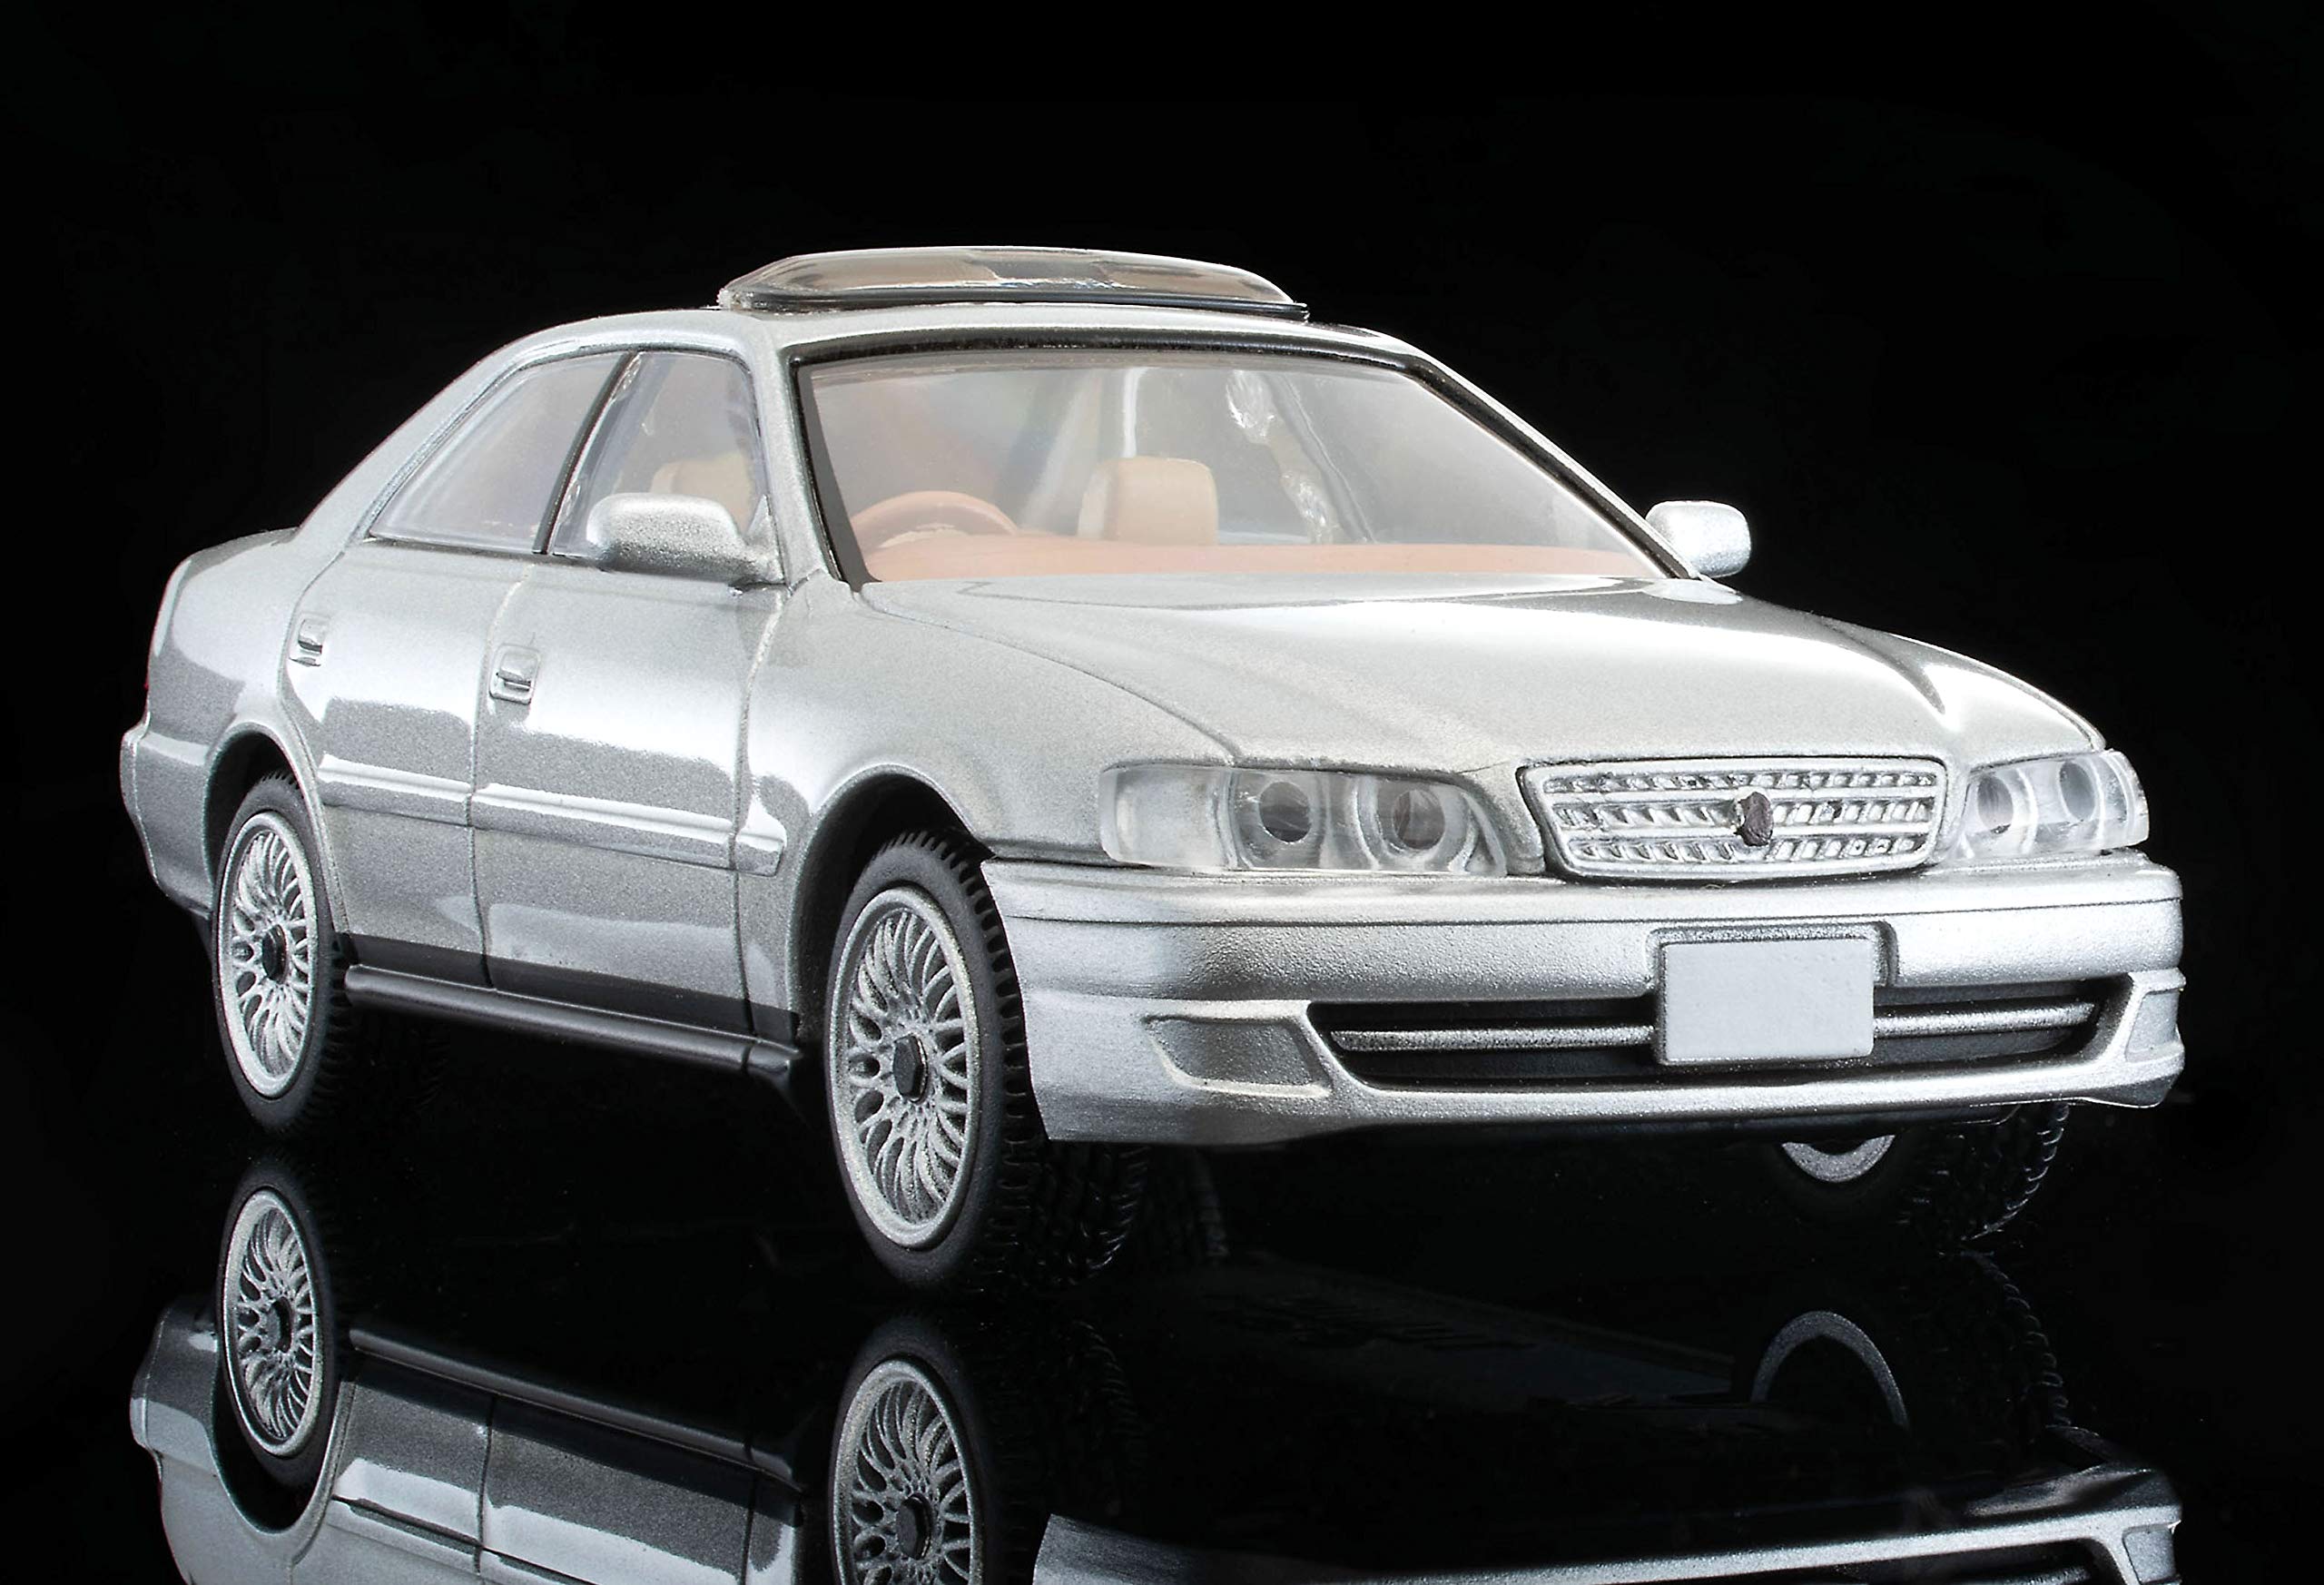 Tomytec Tomica Limited Vintage Neo Toyota Chaser Avante G Silver 1/64 Scale Model